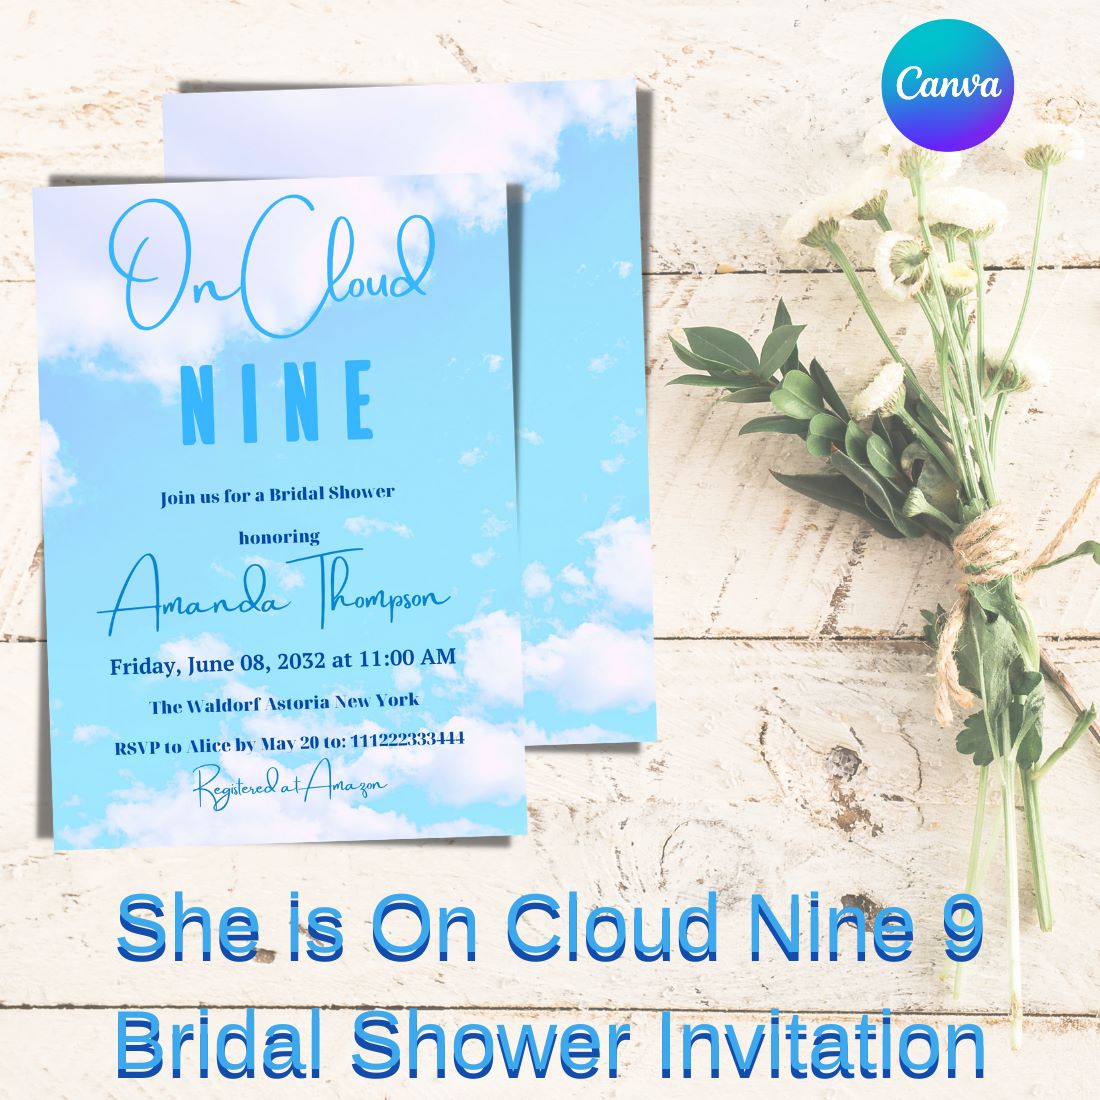 She is On Cloud Nine 9 Bridal Shower Invitation Tamplate cover image.